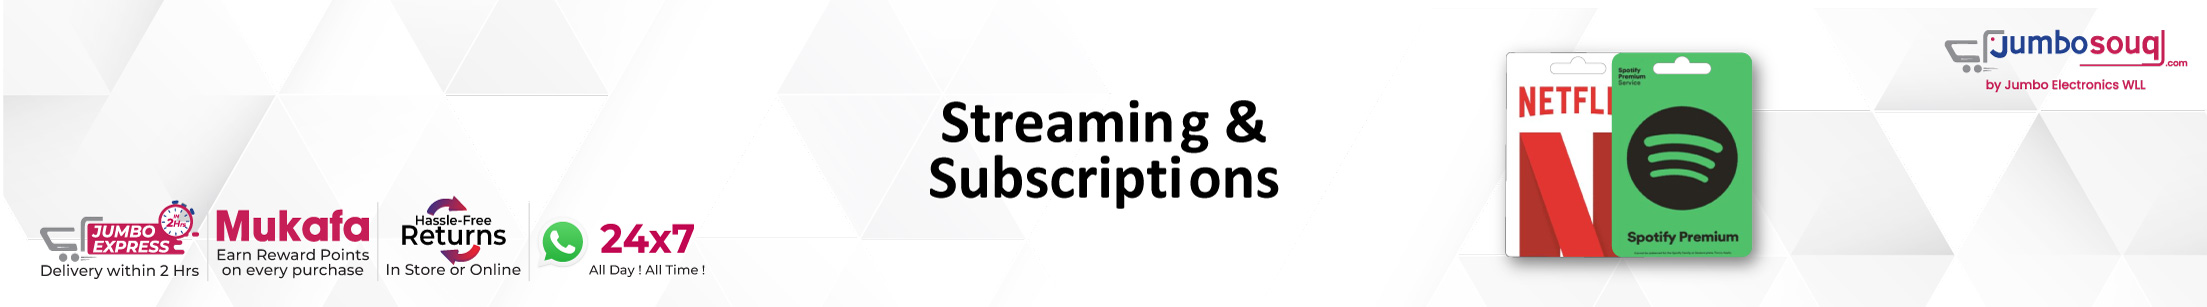 Streaming & Subscriptions